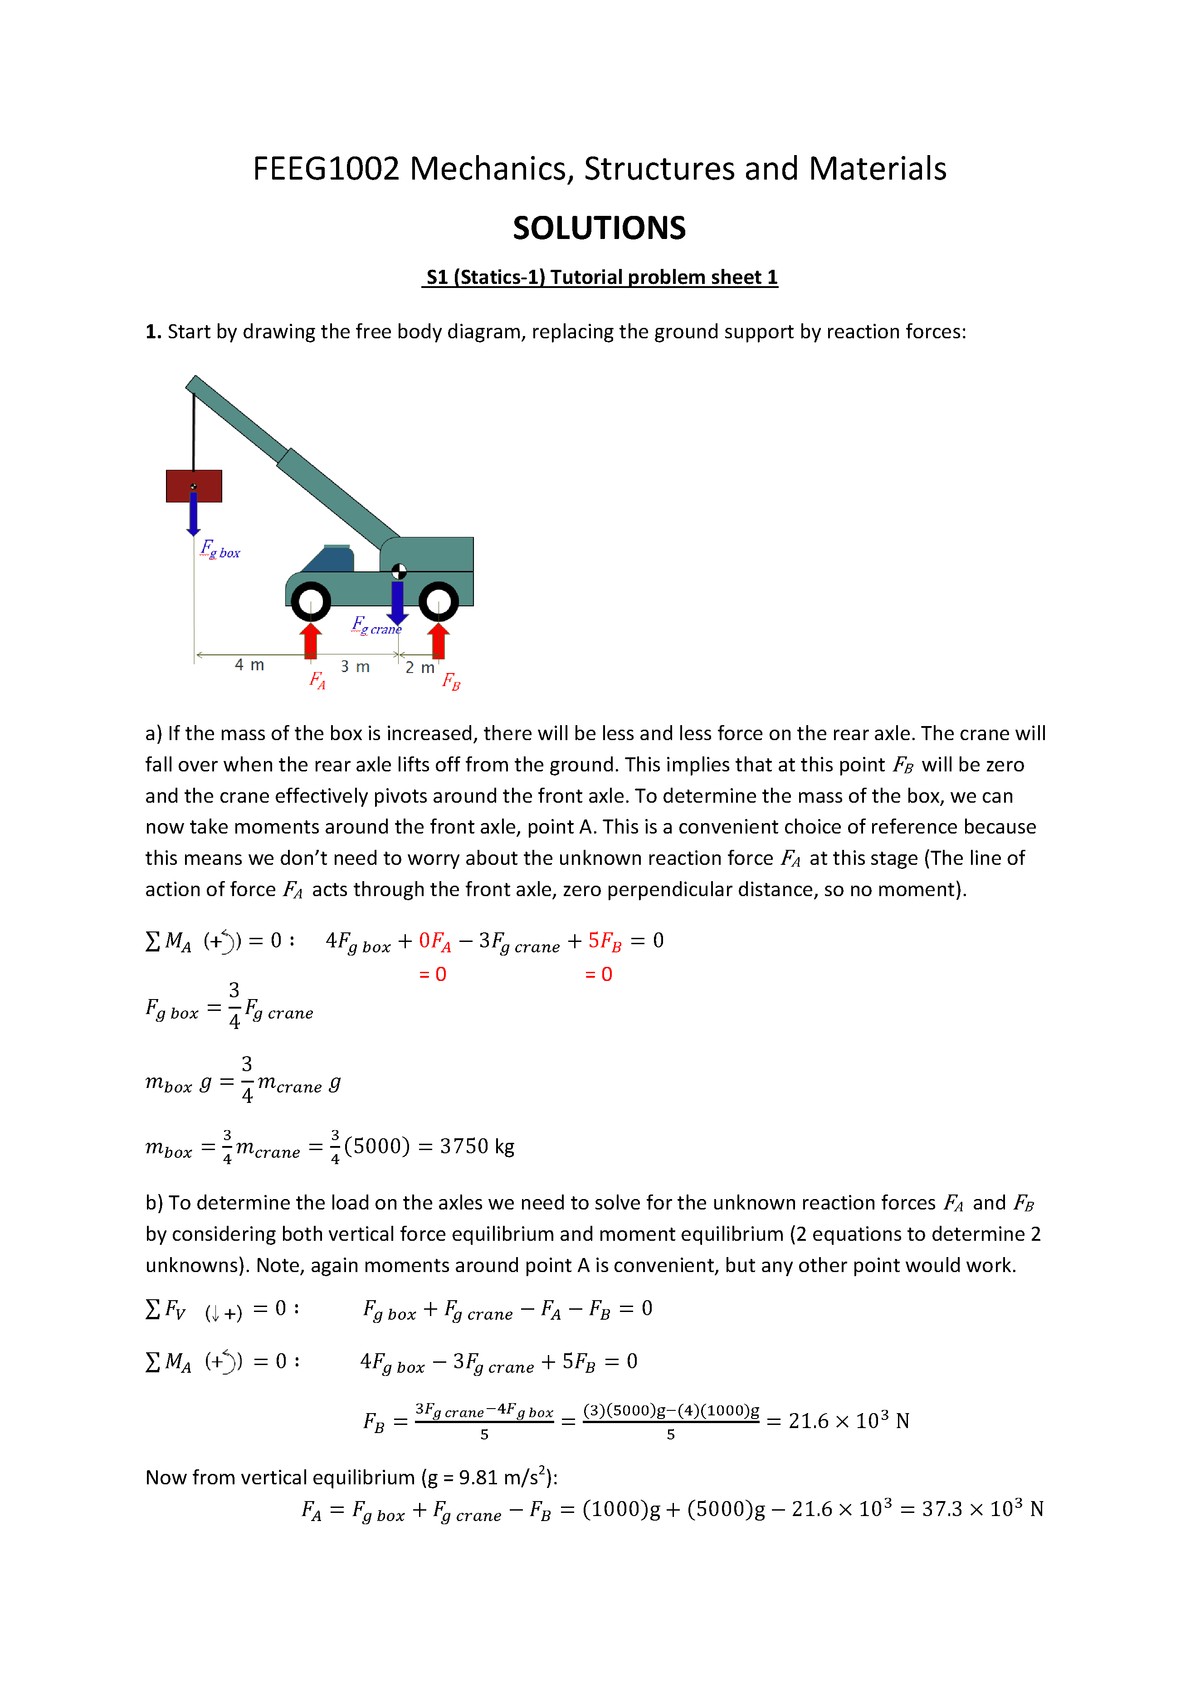 Free Body Diagram Engineering Mechanics Practice Questions Problems Sheets 1 3 with solutions Feeg1002 Of Free Body Diagram Engineering Mechanics